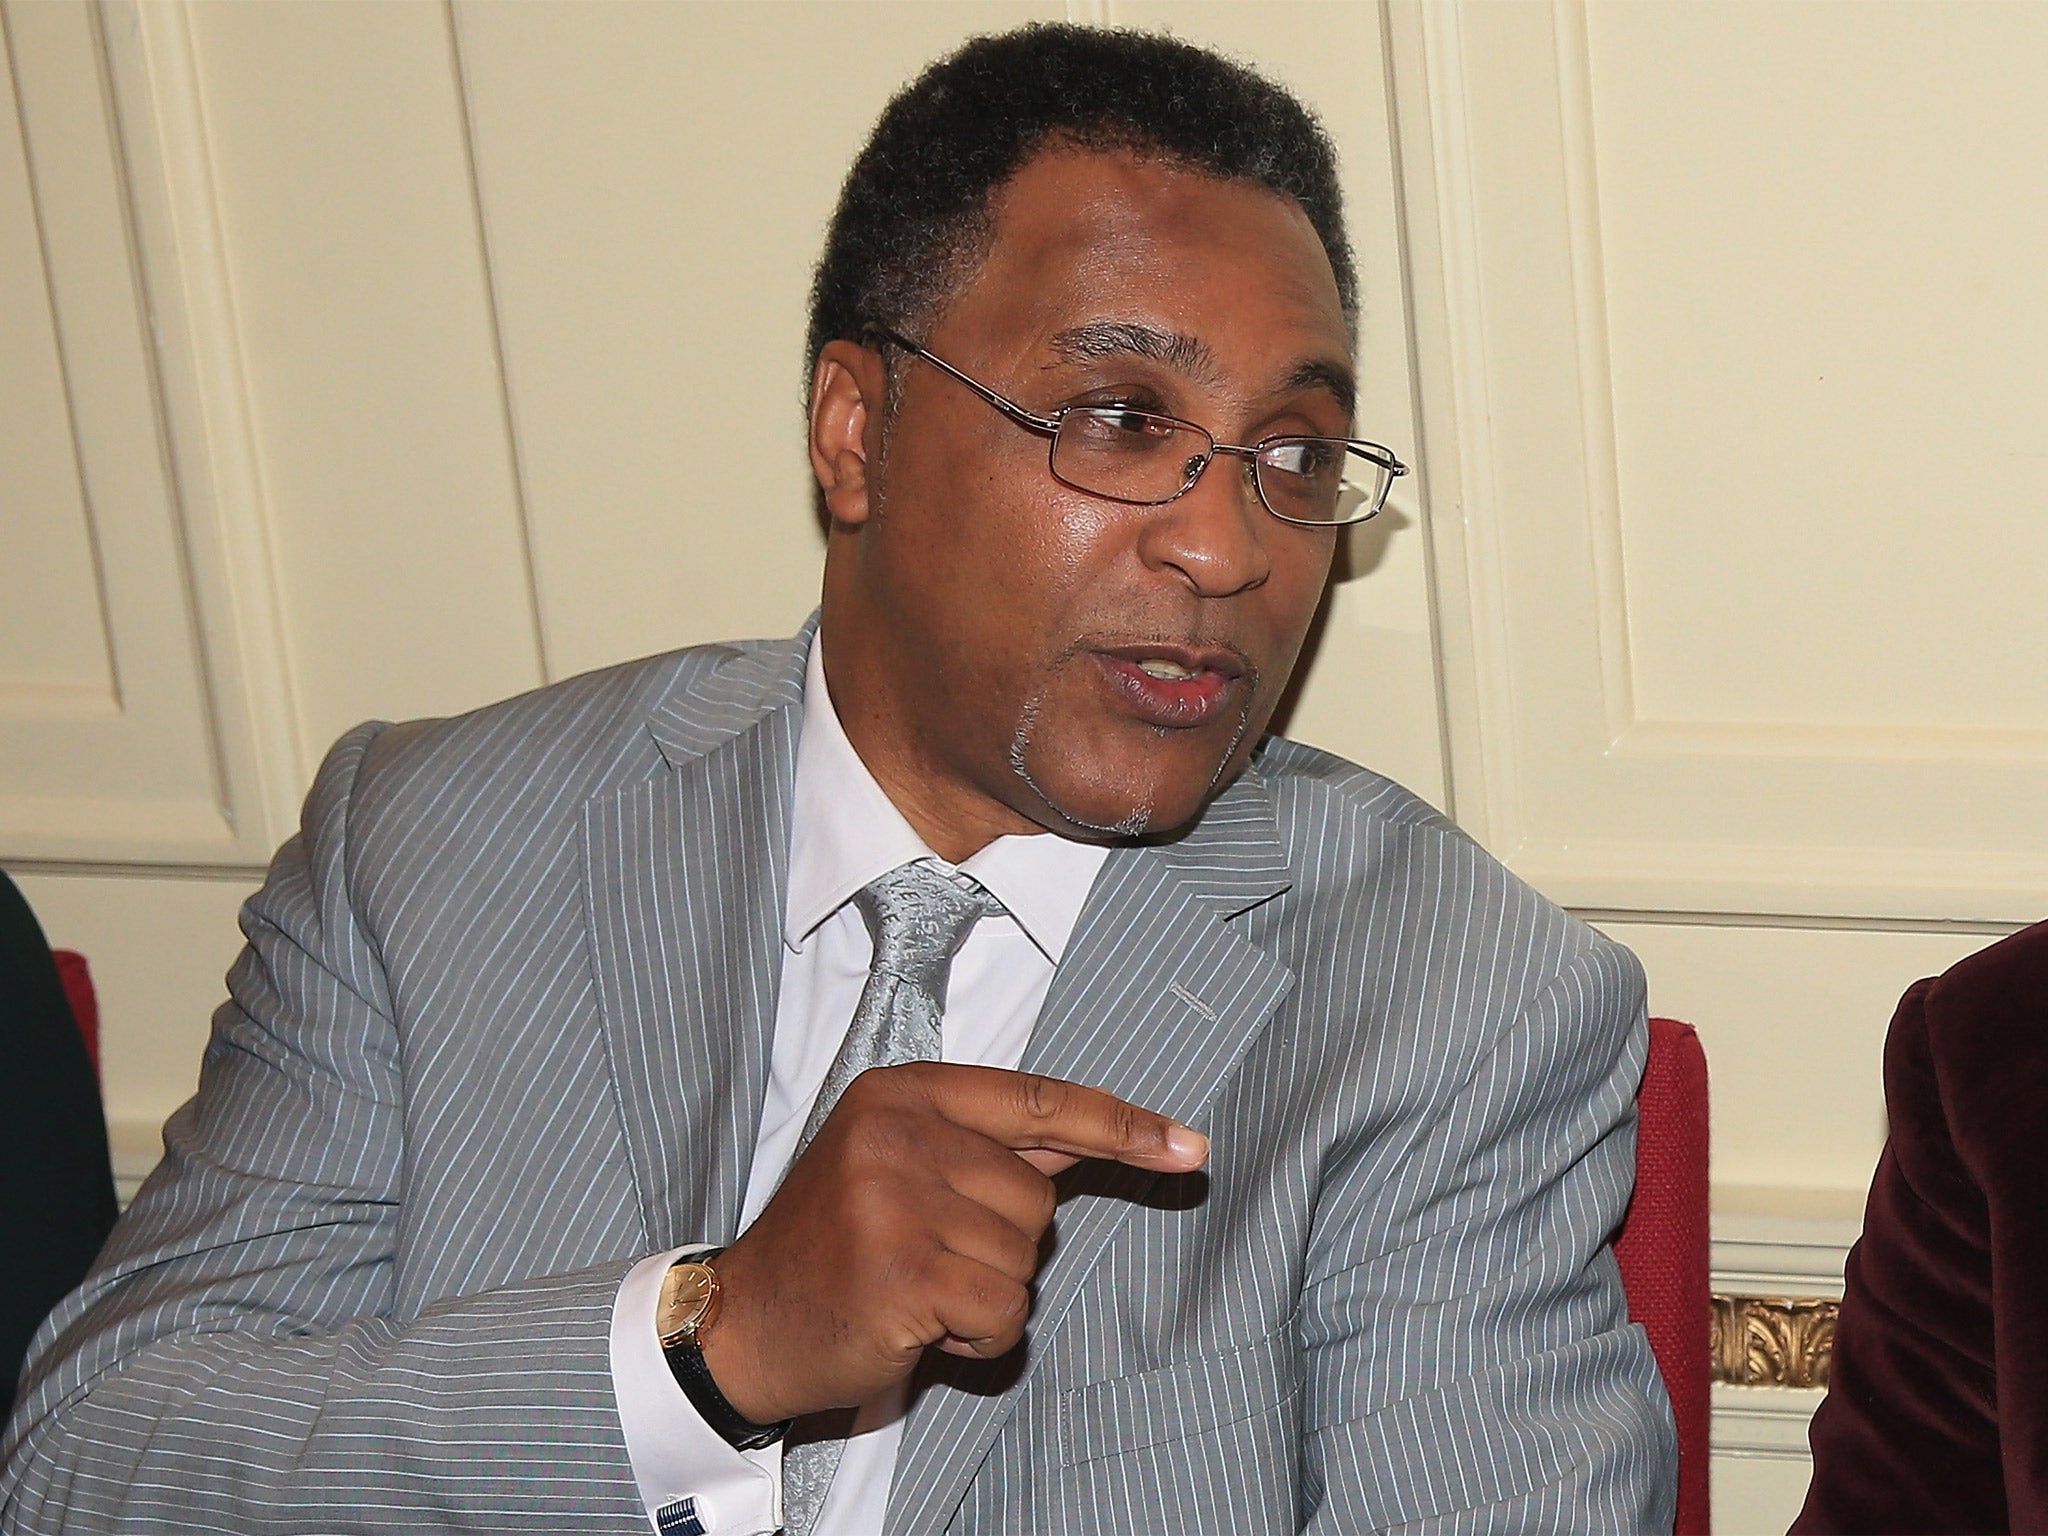 Michael Watson has made a remarkable recovery from the injuries he sustained in 1991